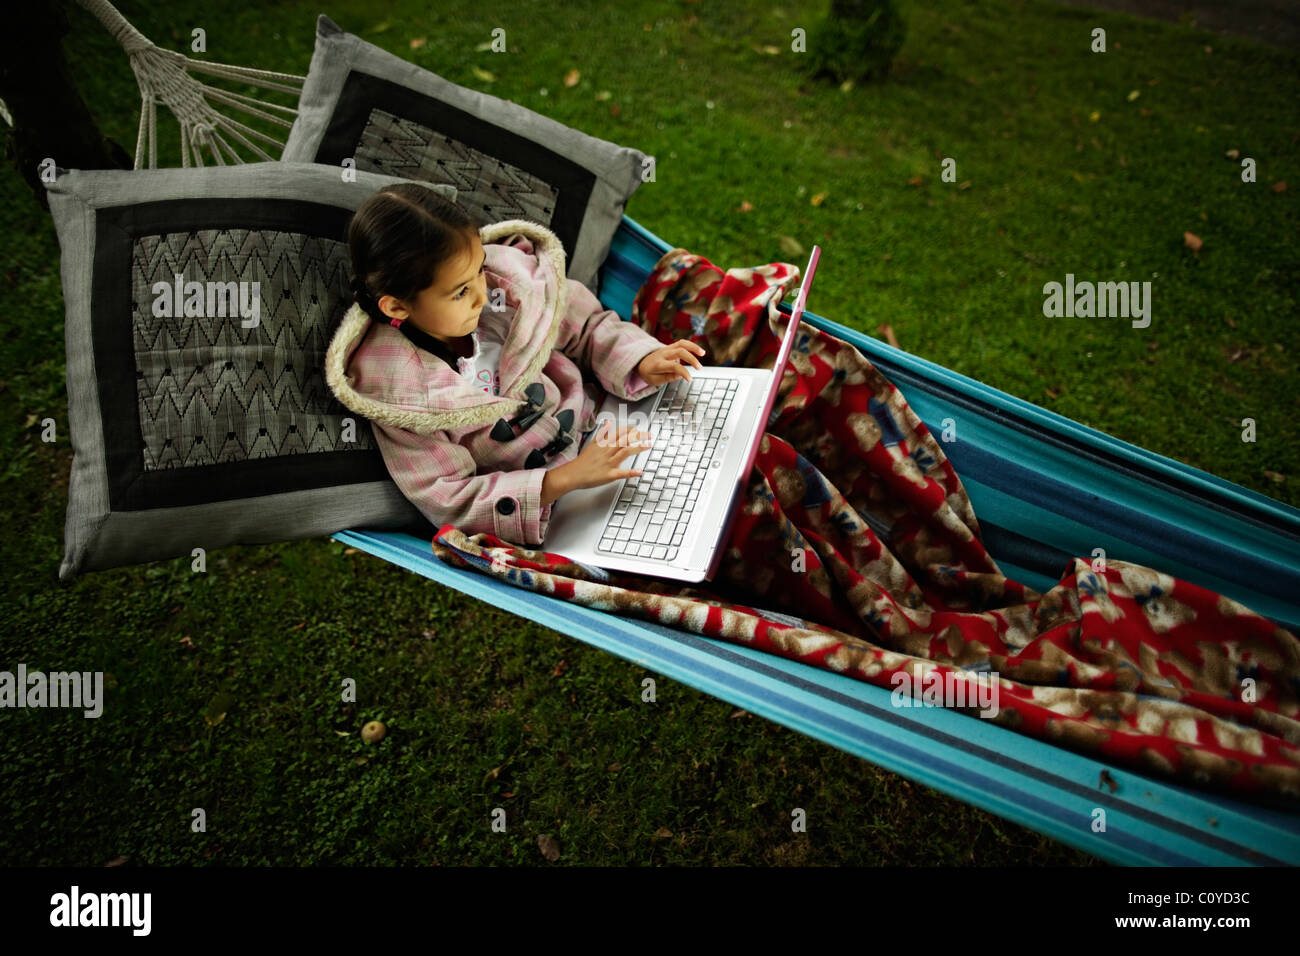 Girl sits in hammock with blanket using laptop computer on a cool evening. Stock Photo